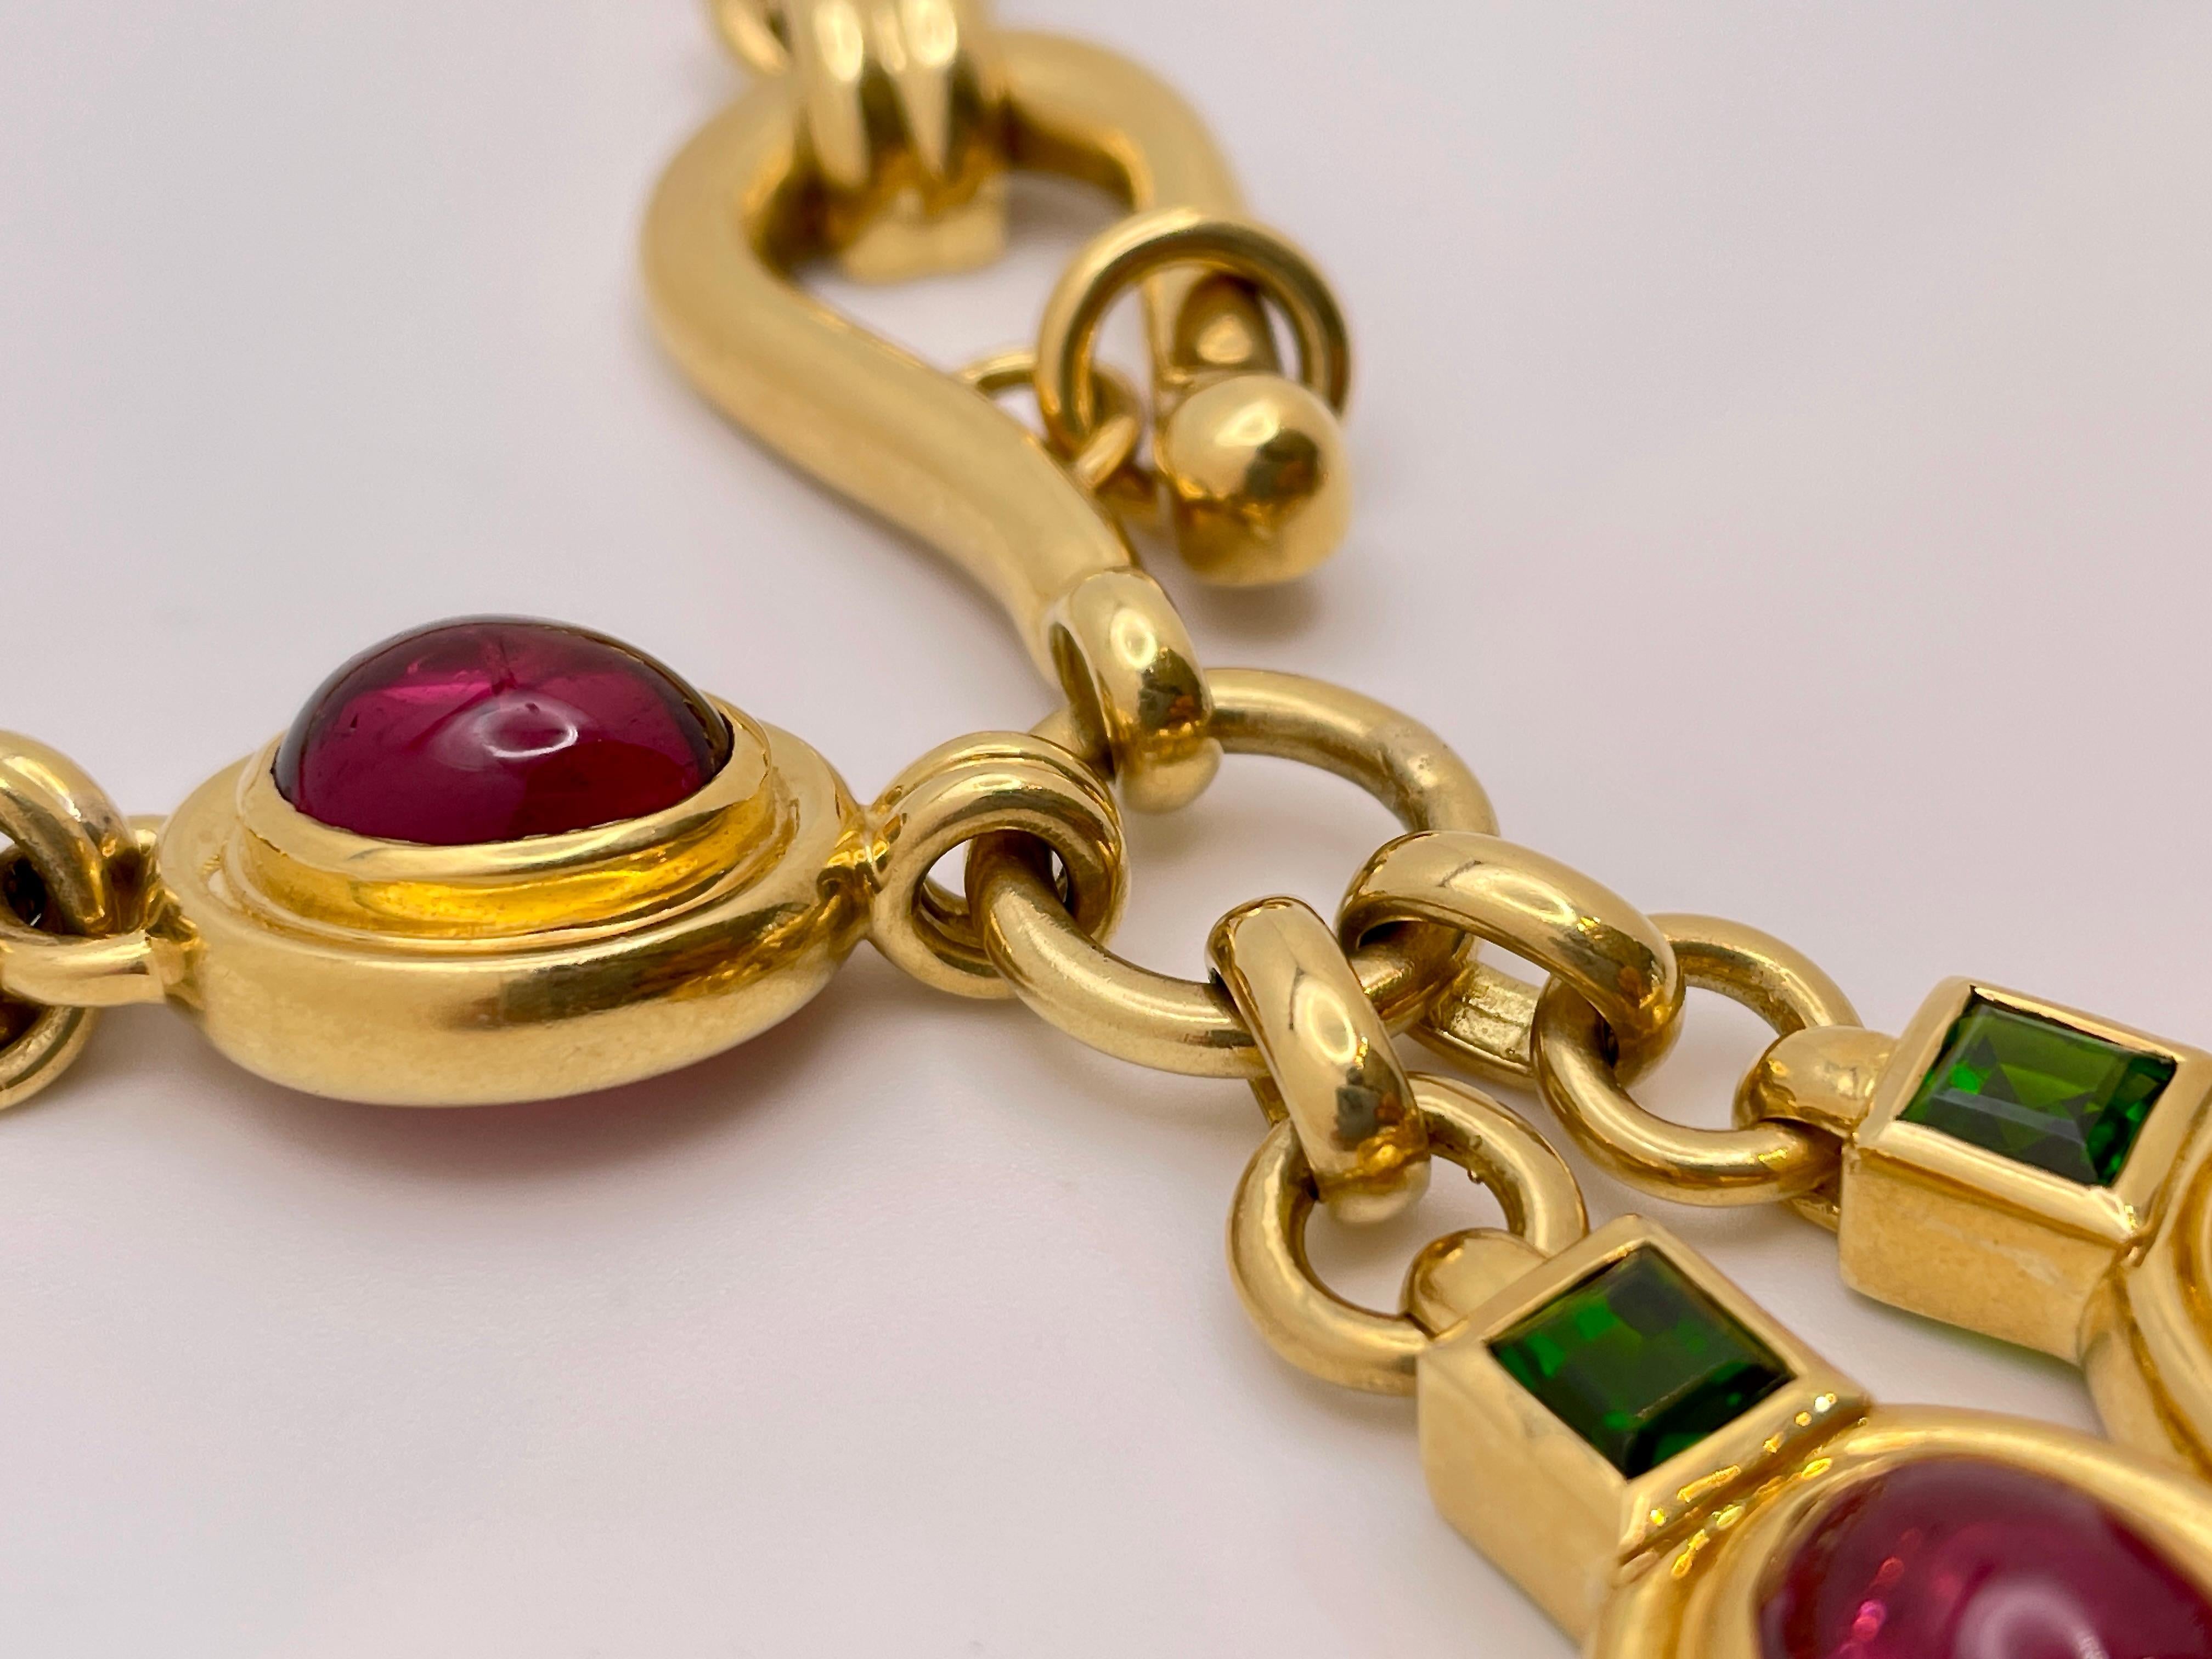 An extraordinary 18K yellow gold green and pink turmaline necklace. Mounted with three oval cabochon cut turmaline stones, weighing a total of approximately 15 CT, and two smaller square cut turmaline stones weighing a total of approximately 3 CT.